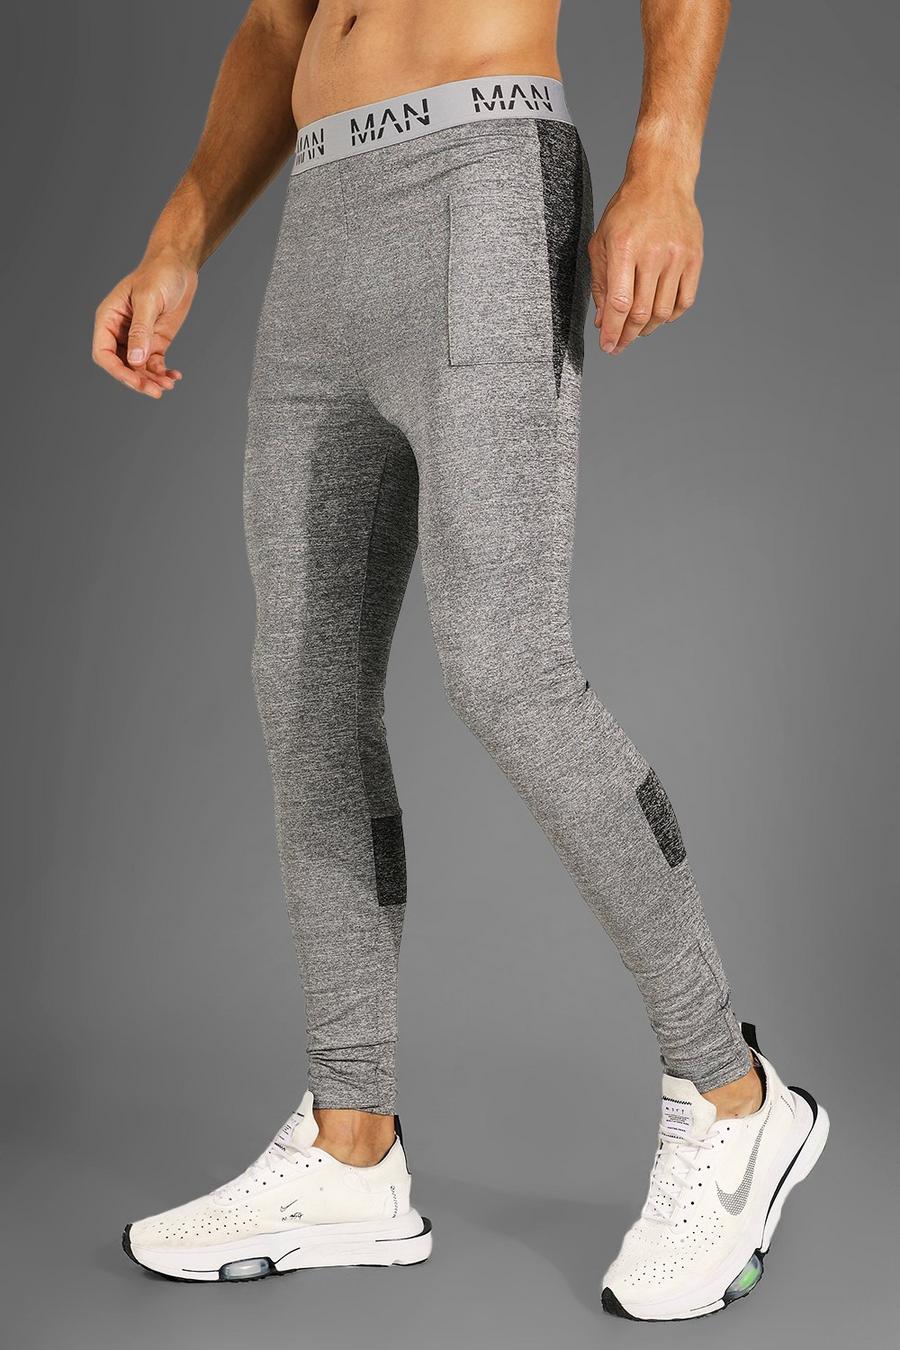 Charcoal gris Tall Man Active Gym Compression Leggings image number 1